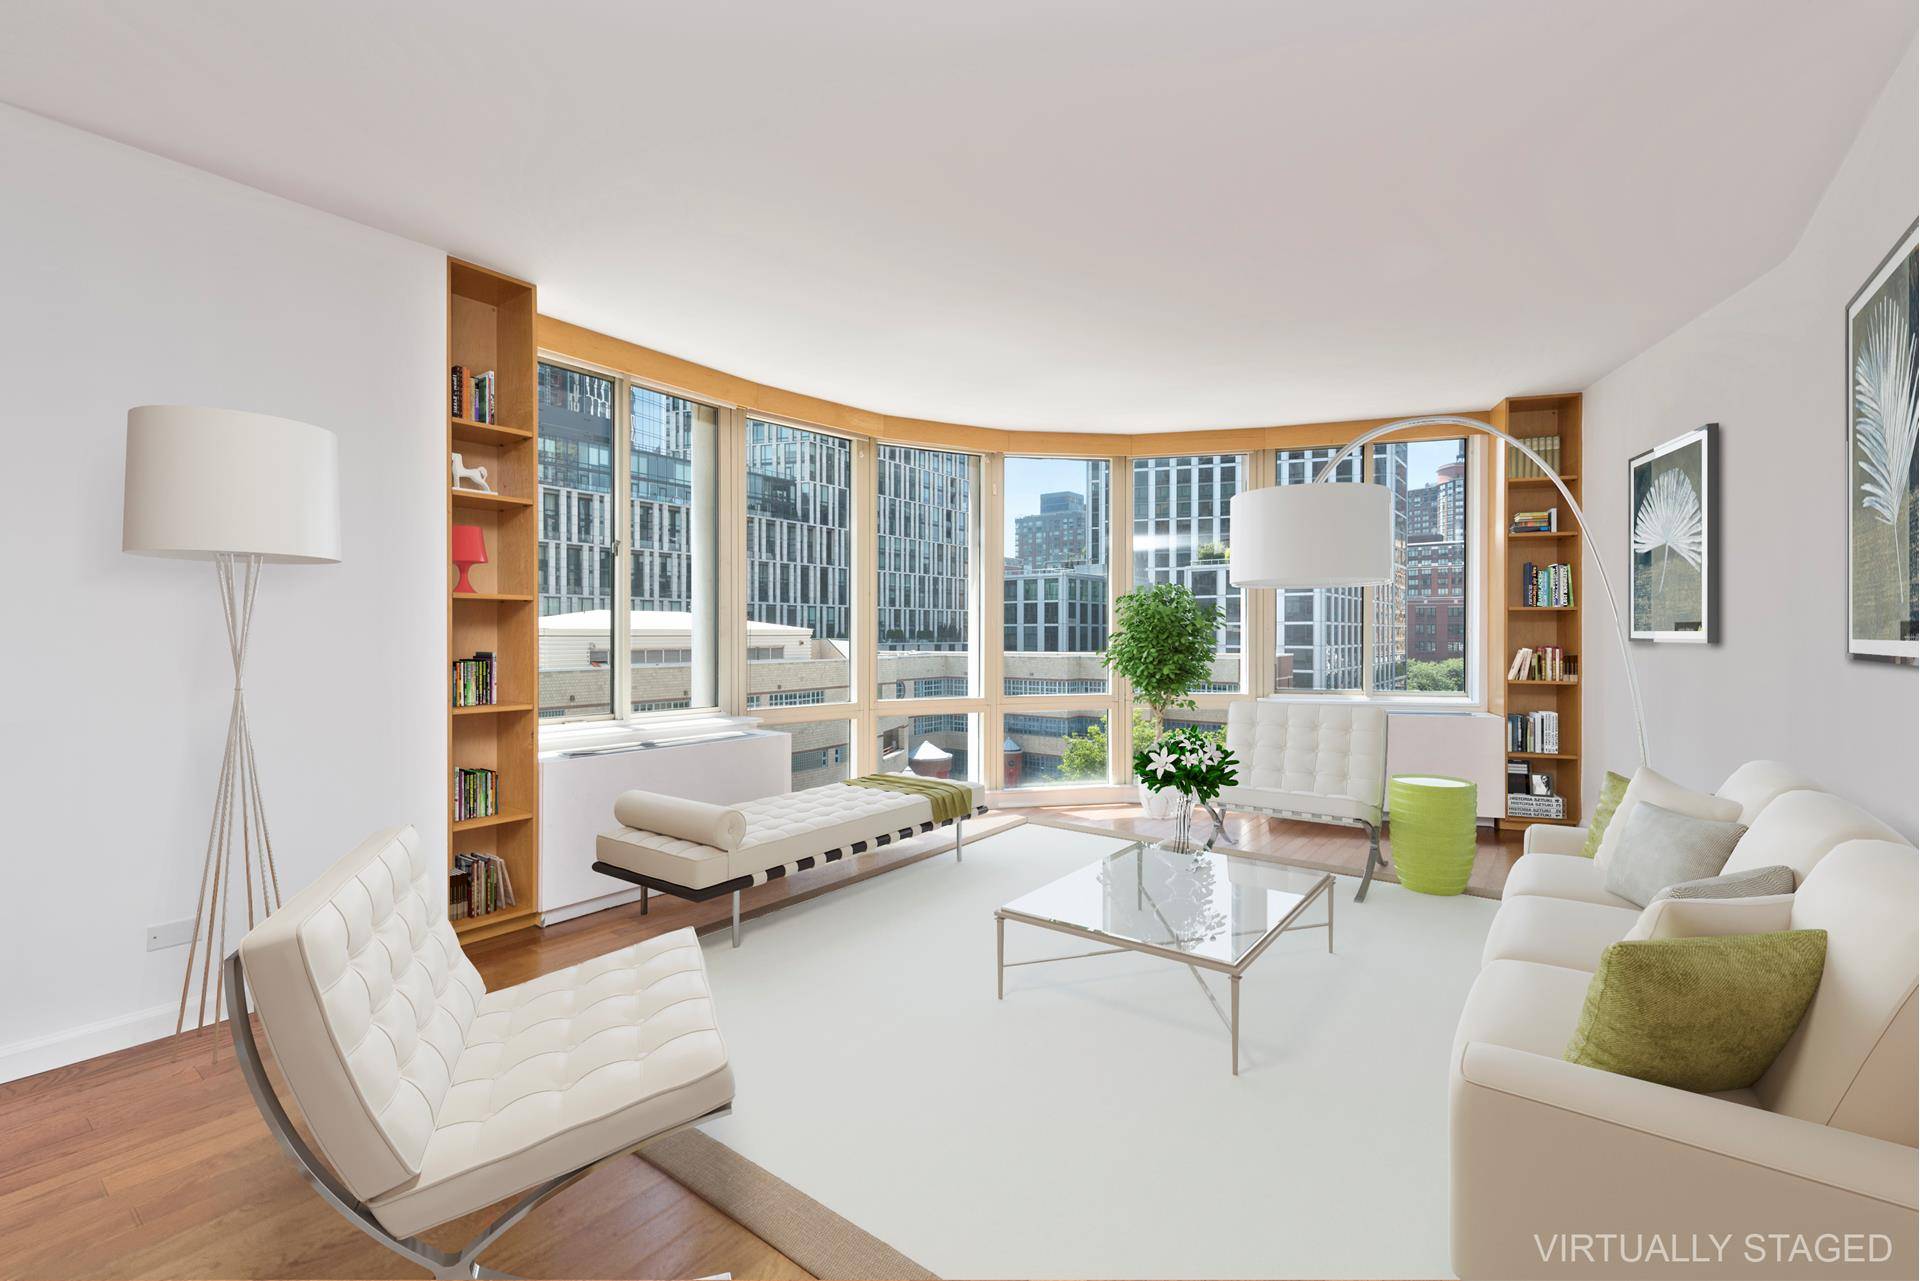 Newly renovated spacious and bright convertible two bedroom, two bath corner apartment in one of Tribeca's best full service condominiums, apartment 6D provides expansive city and park views.